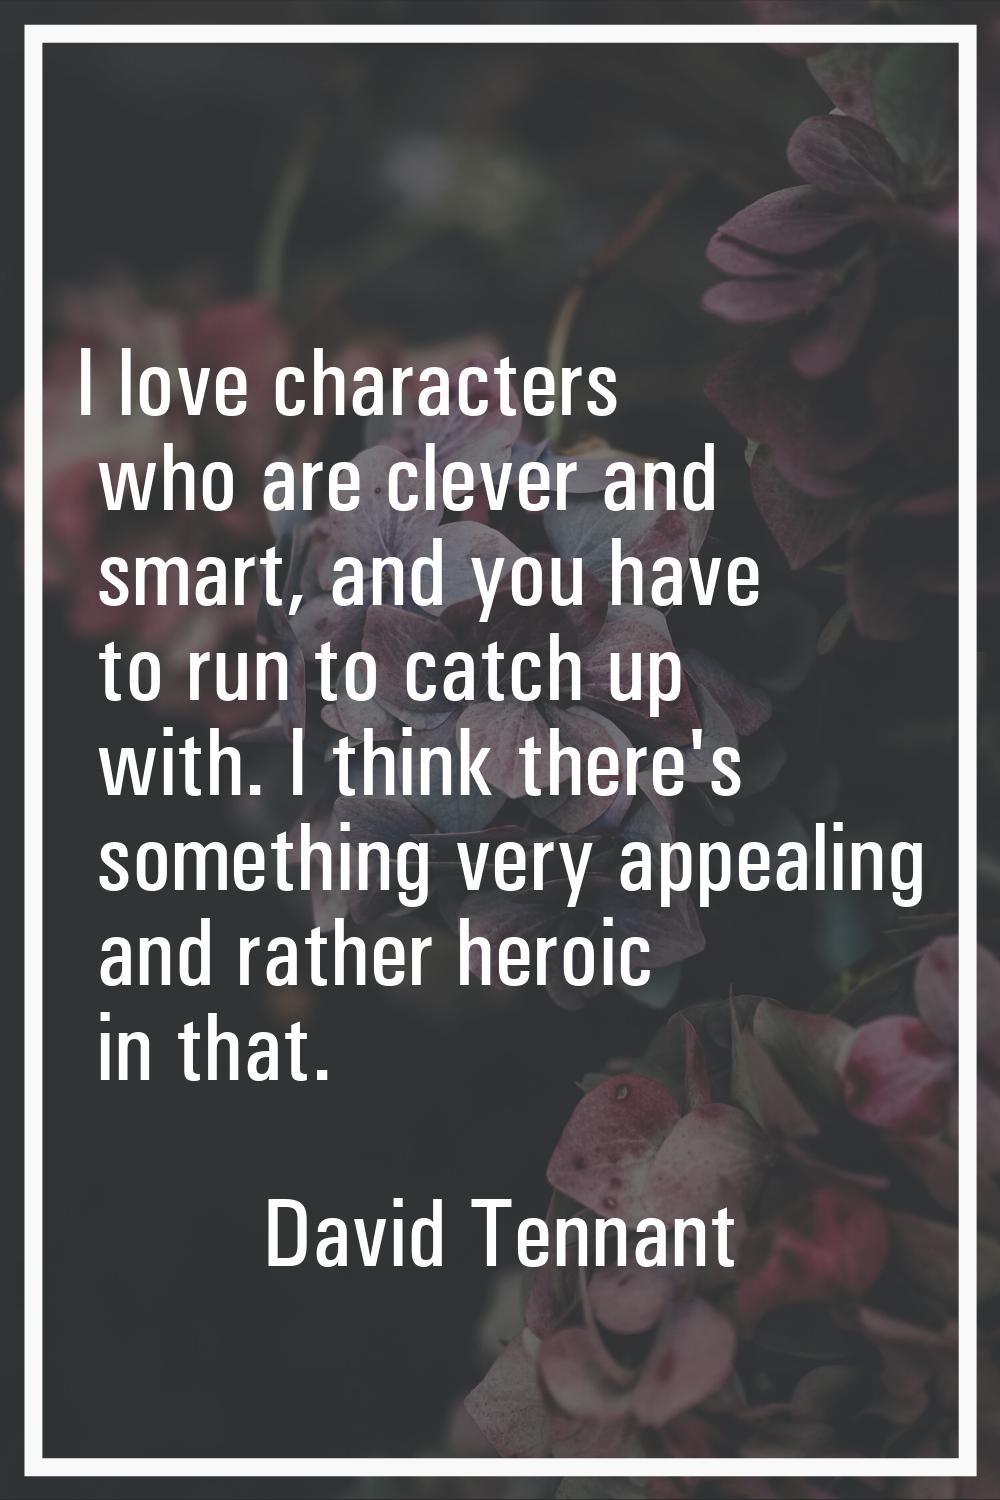 I love characters who are clever and smart, and you have to run to catch up with. I think there's s